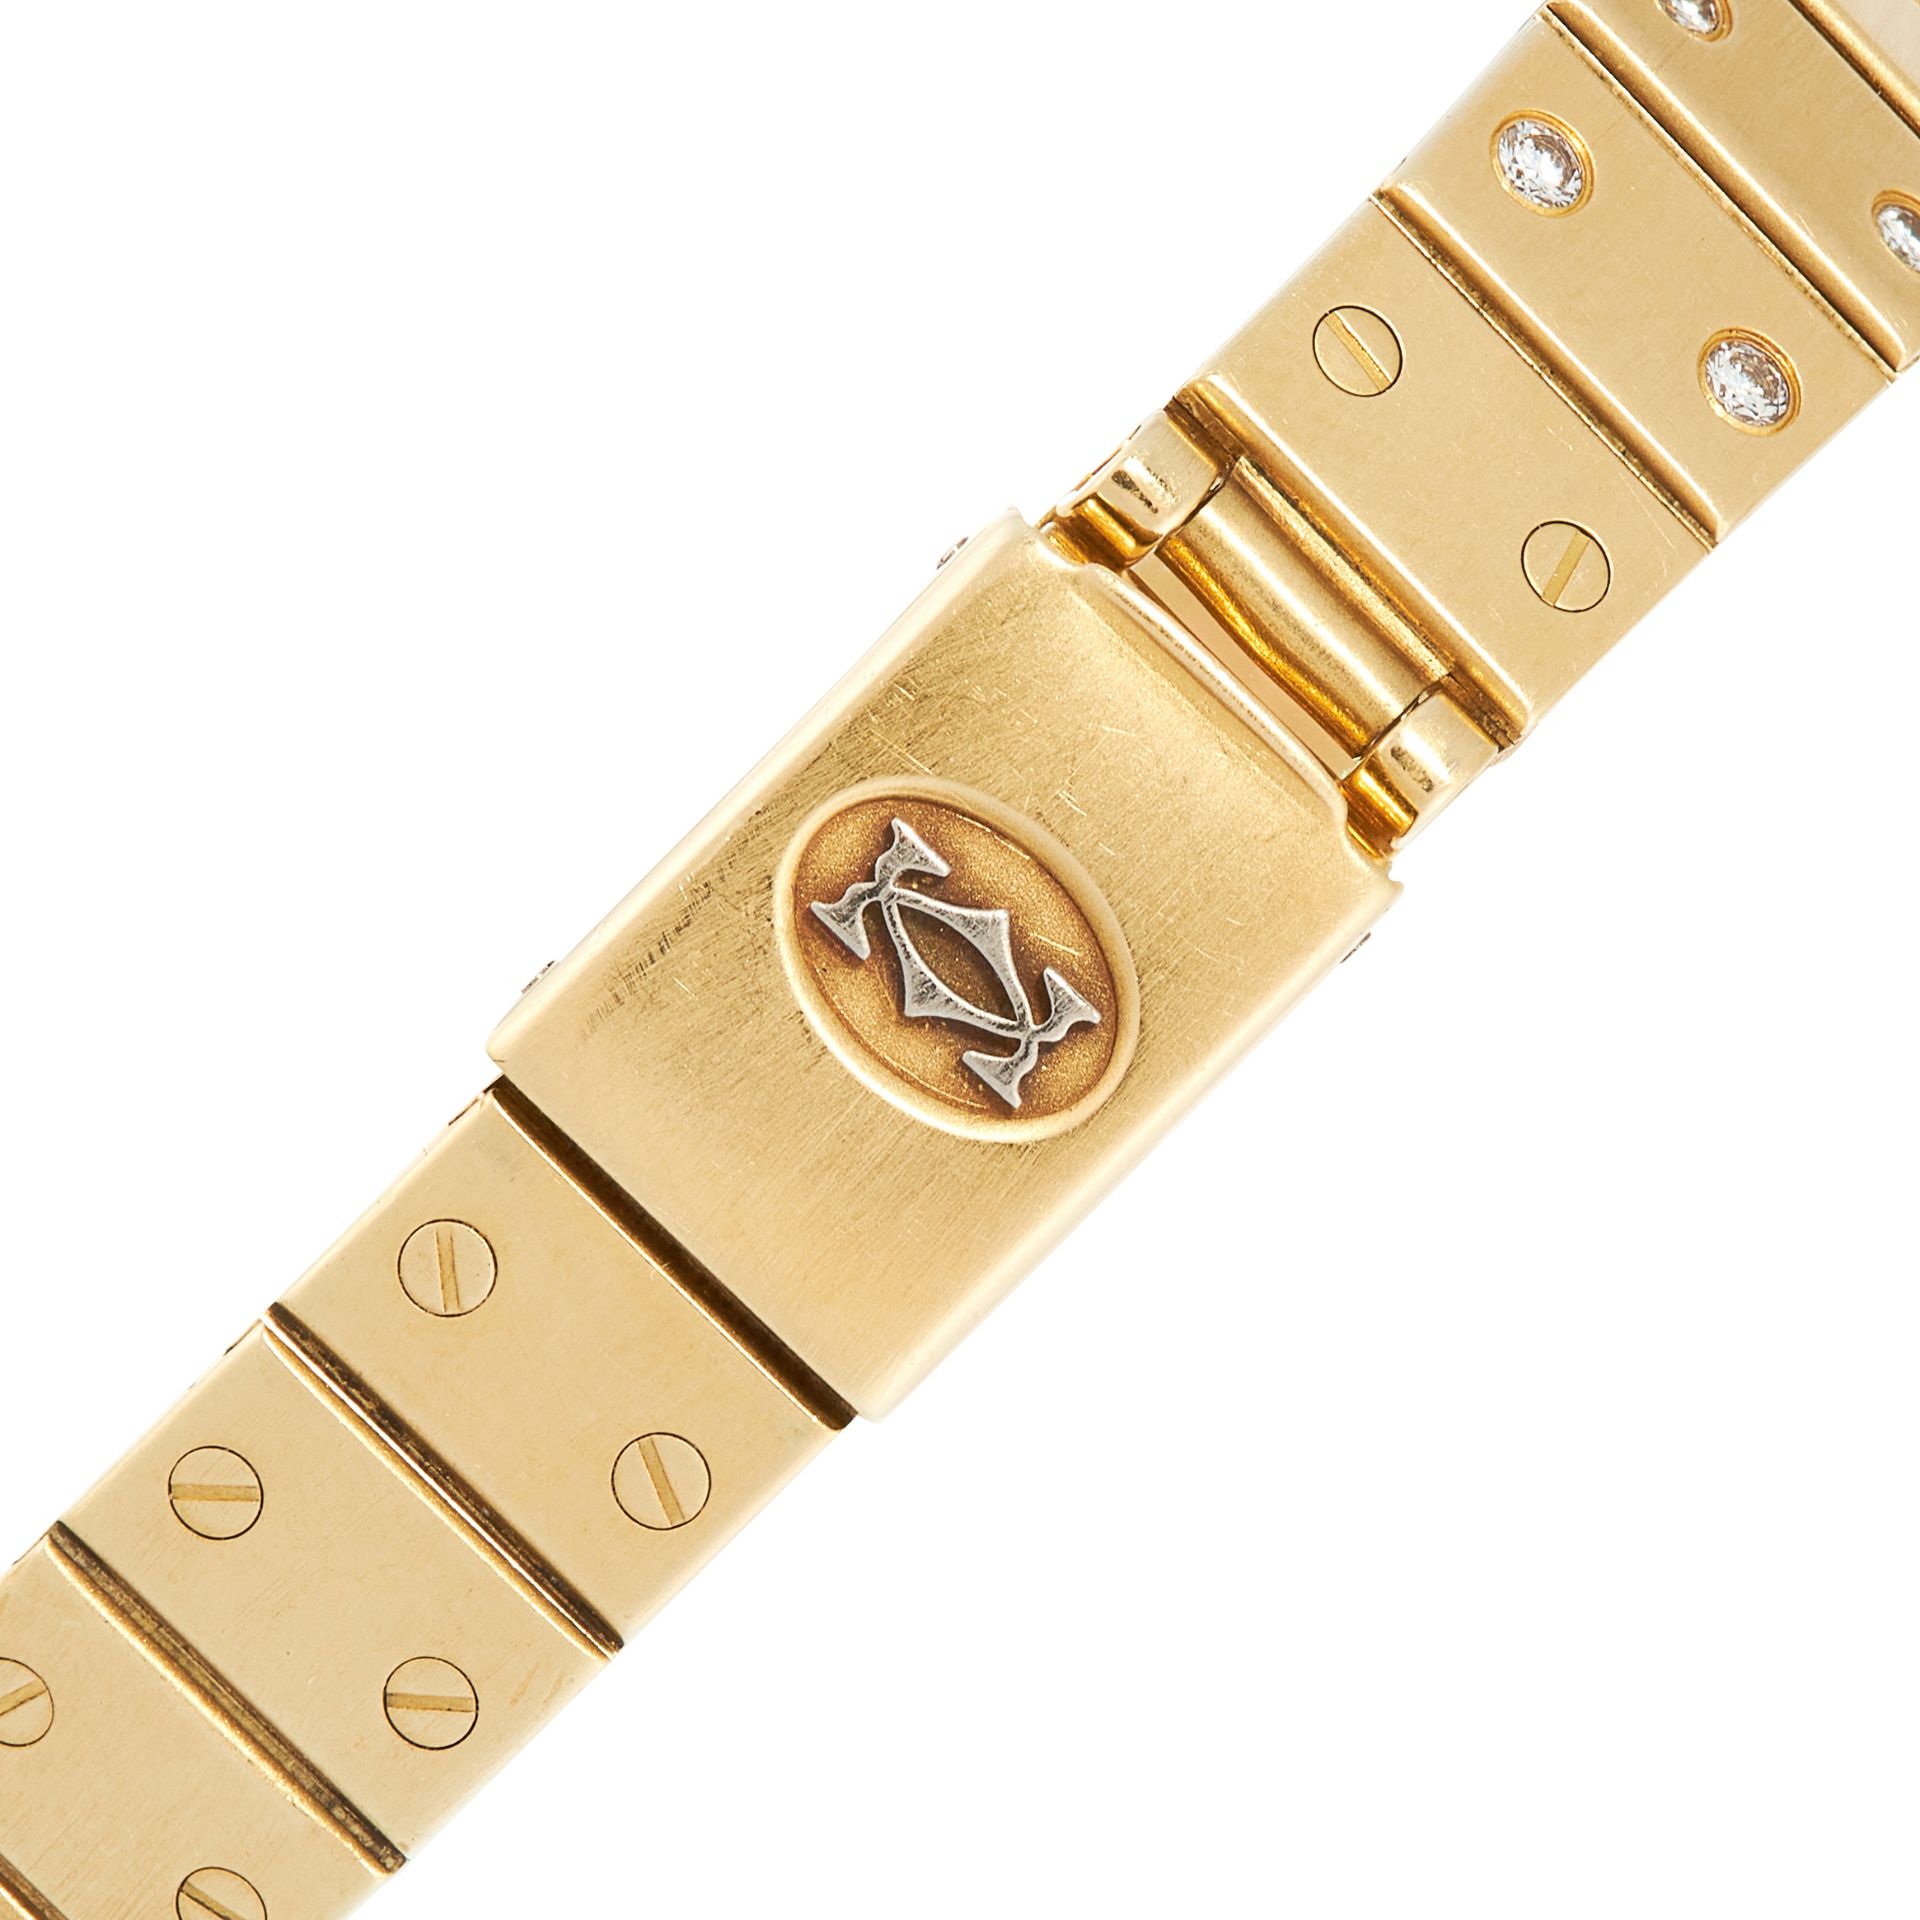 A LADIES SANTOS DIAMOND WRIST WATCH, CARTIER in 18ct yellow gold, the face with Roman numerals, - Image 3 of 5